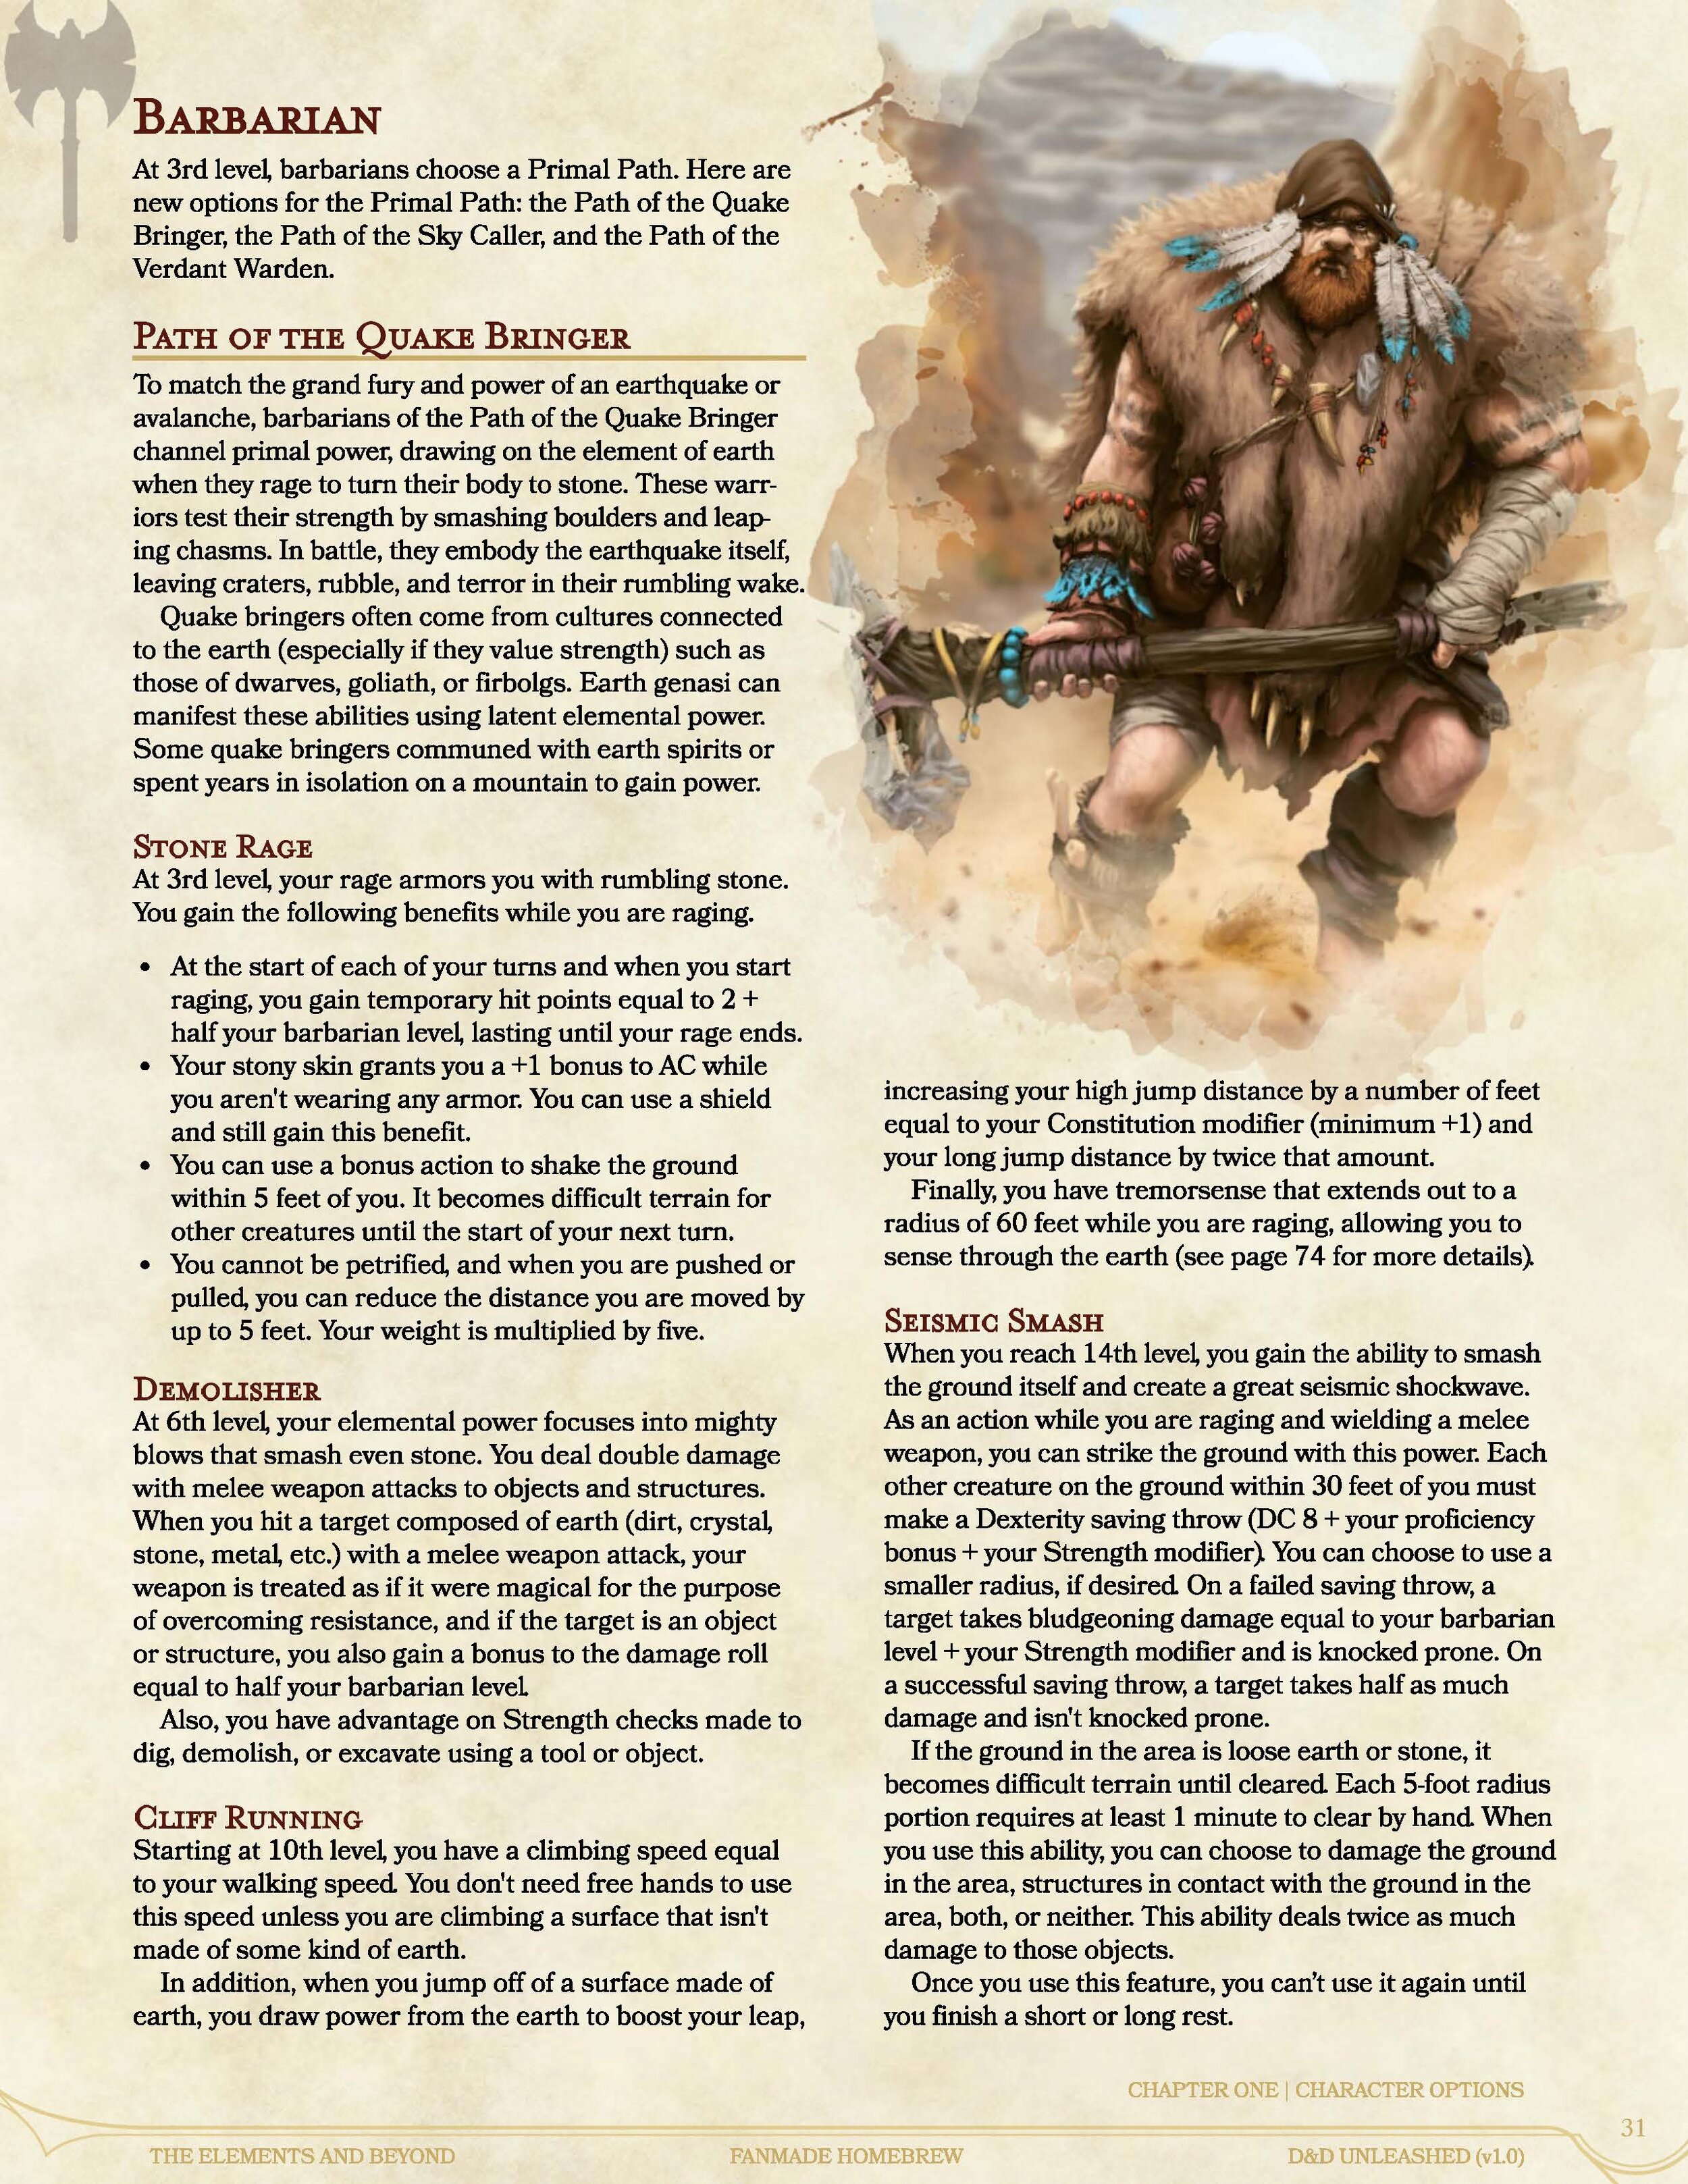 D&D Unleashed Compendium -- The Elements and Beyond (v1p0)_Page_031.jpg